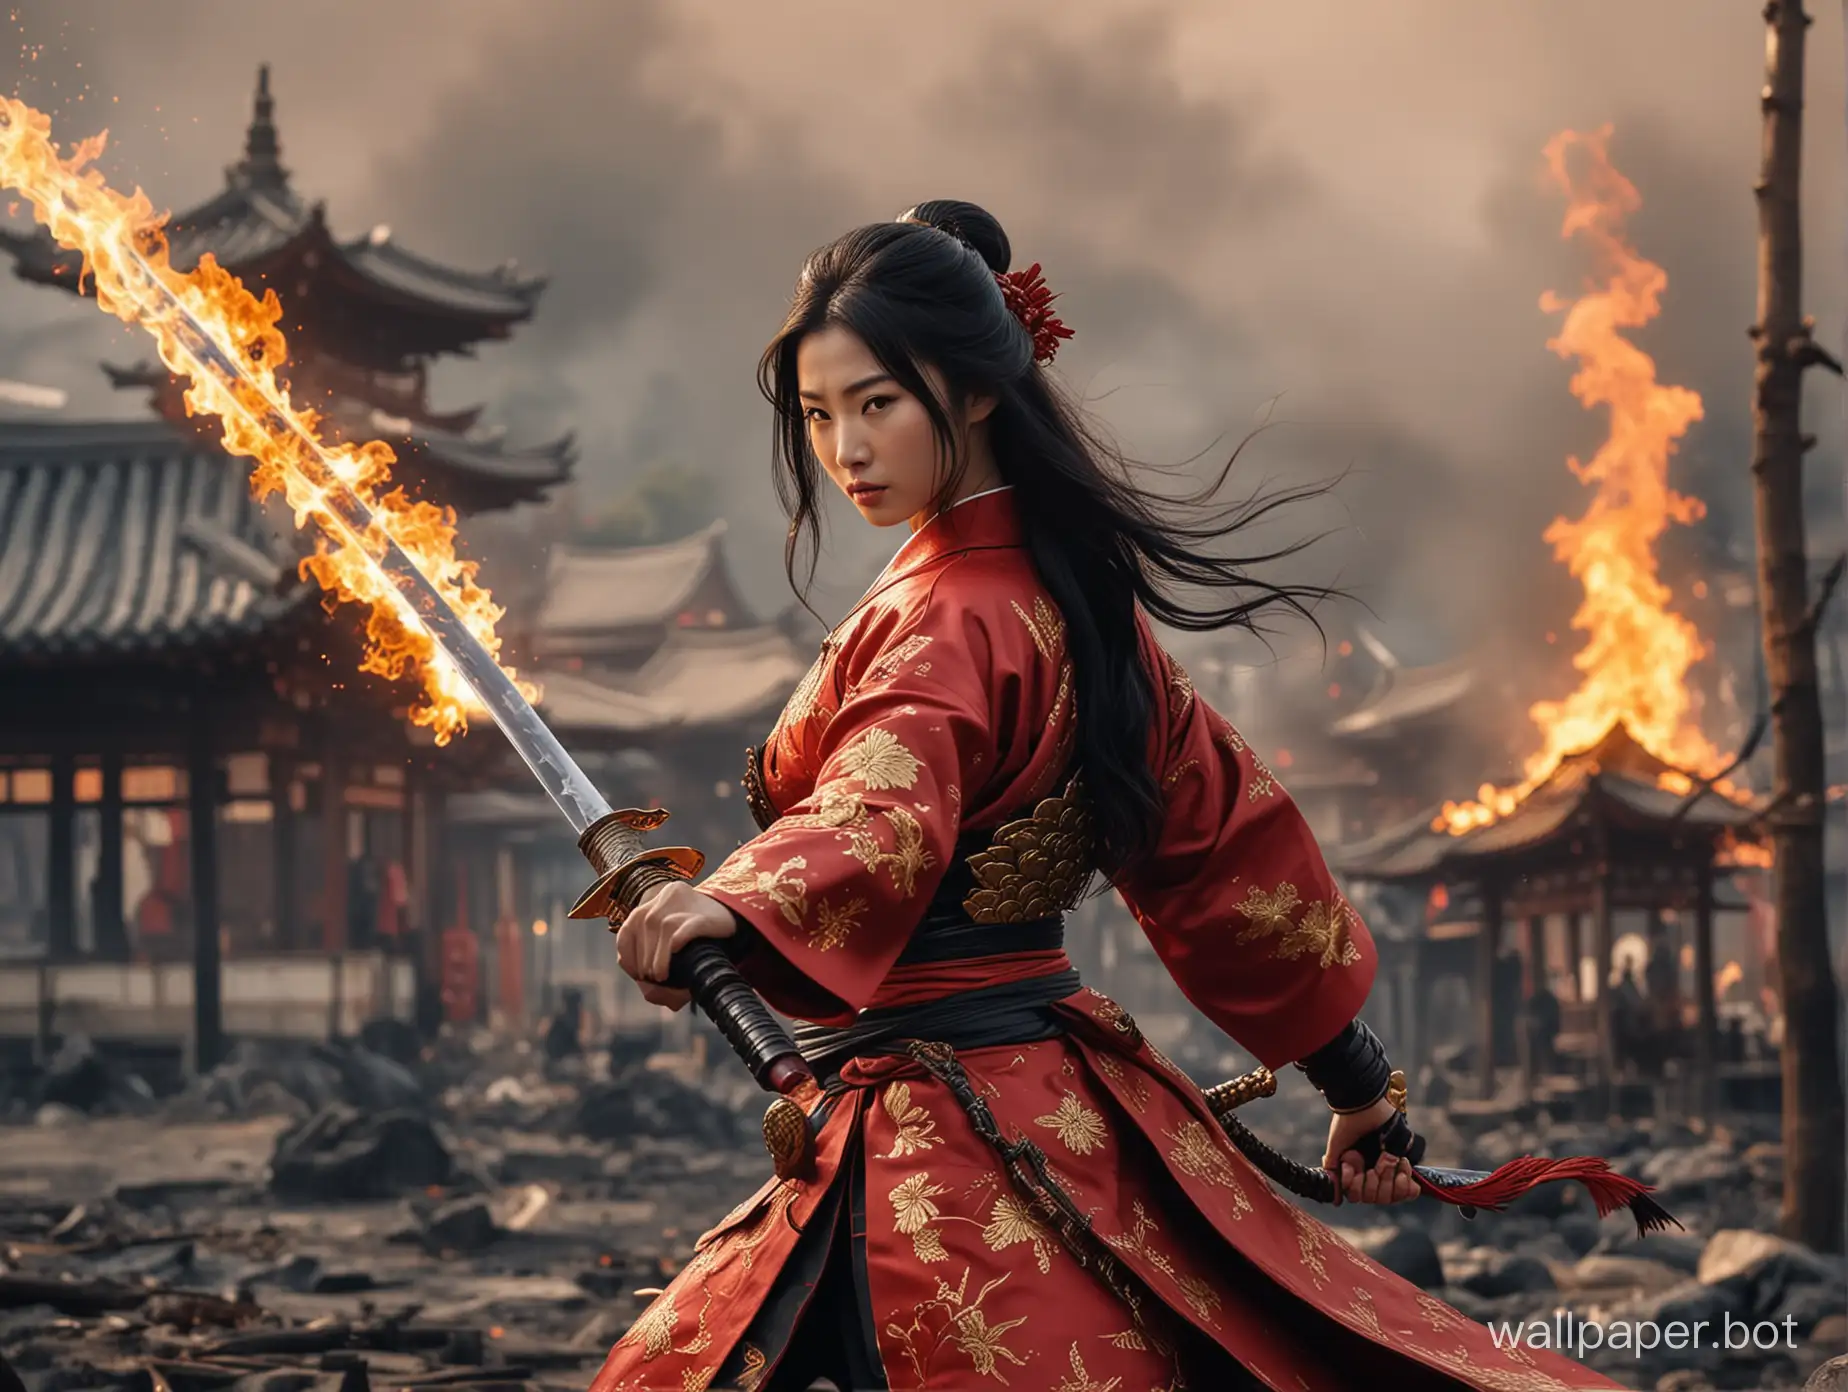 female samurai, face like Mulan, long black hair, wavy hair, red shiny samurai armor with gold lotus motive. Flame katana in her hands stands in a fighting stance. Edo city burns down in the background while a fire dragon flies in the sky, cinema scene. Porcelain skin.